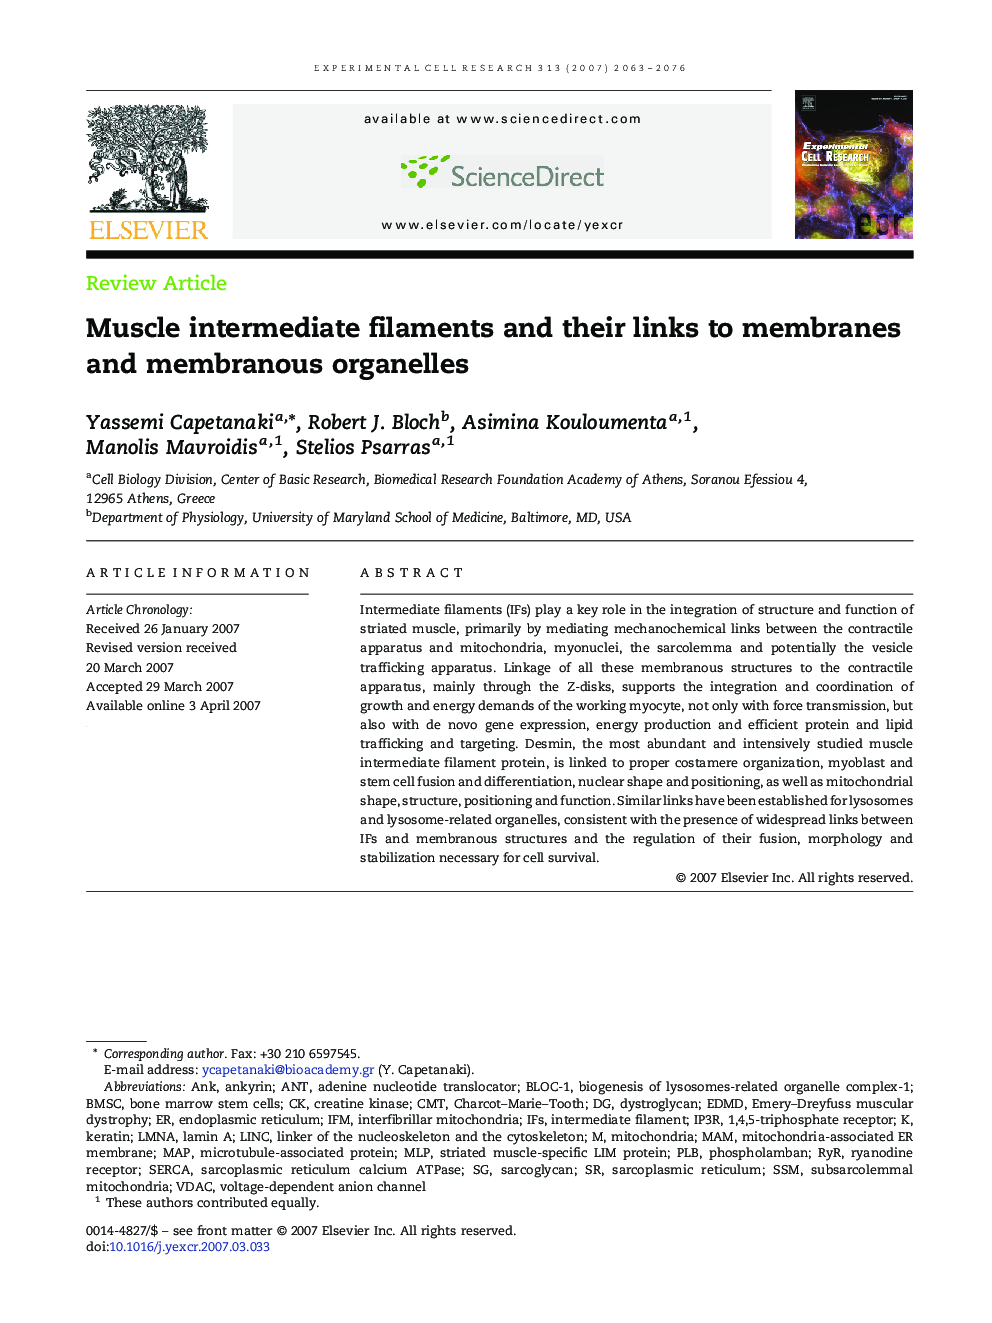 Muscle intermediate filaments and their links to membranes and membranous organelles